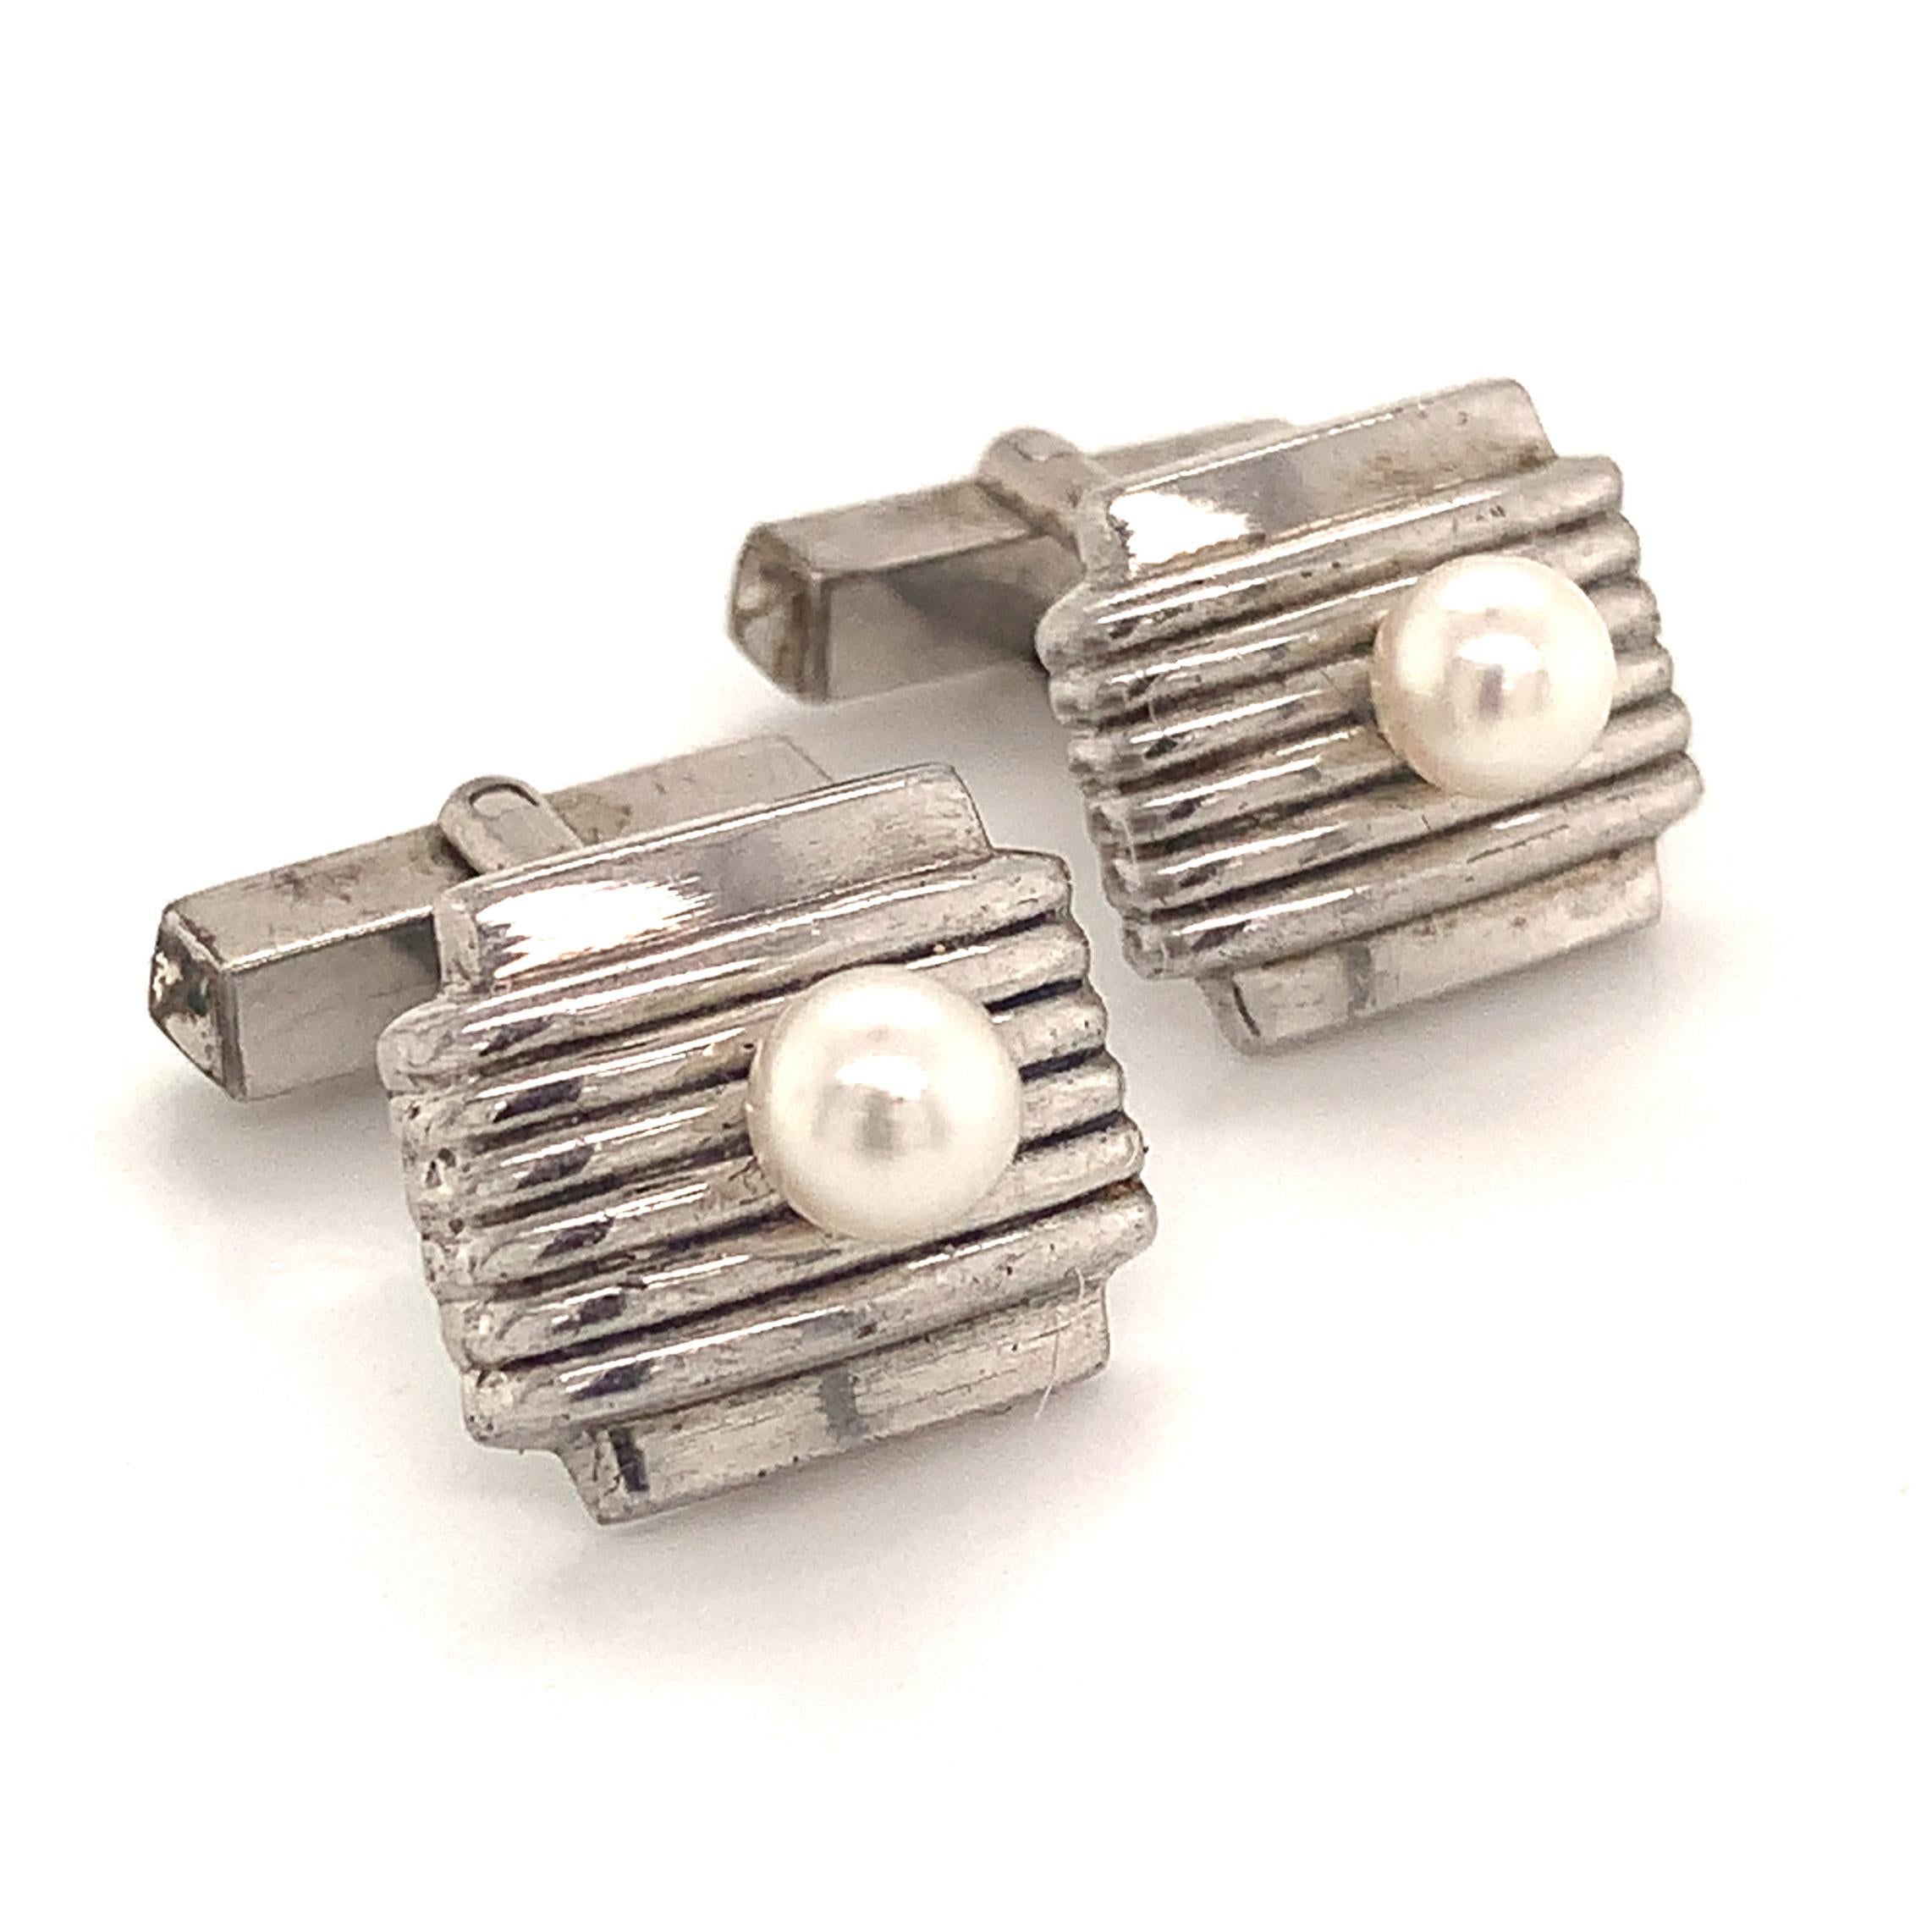 Mikimoto Estate Akoya Pearl Cufflinks Sterling Silver 5 mm 7.56 Grams M218

These elegant Authentic Mikimoto Estate Akoya pearl cufflinks are made of sterling silver and have 2 Akoya Cultured Pearls.

TRUSTED SELLER SINCE 2002

PLEASE SEE OUR